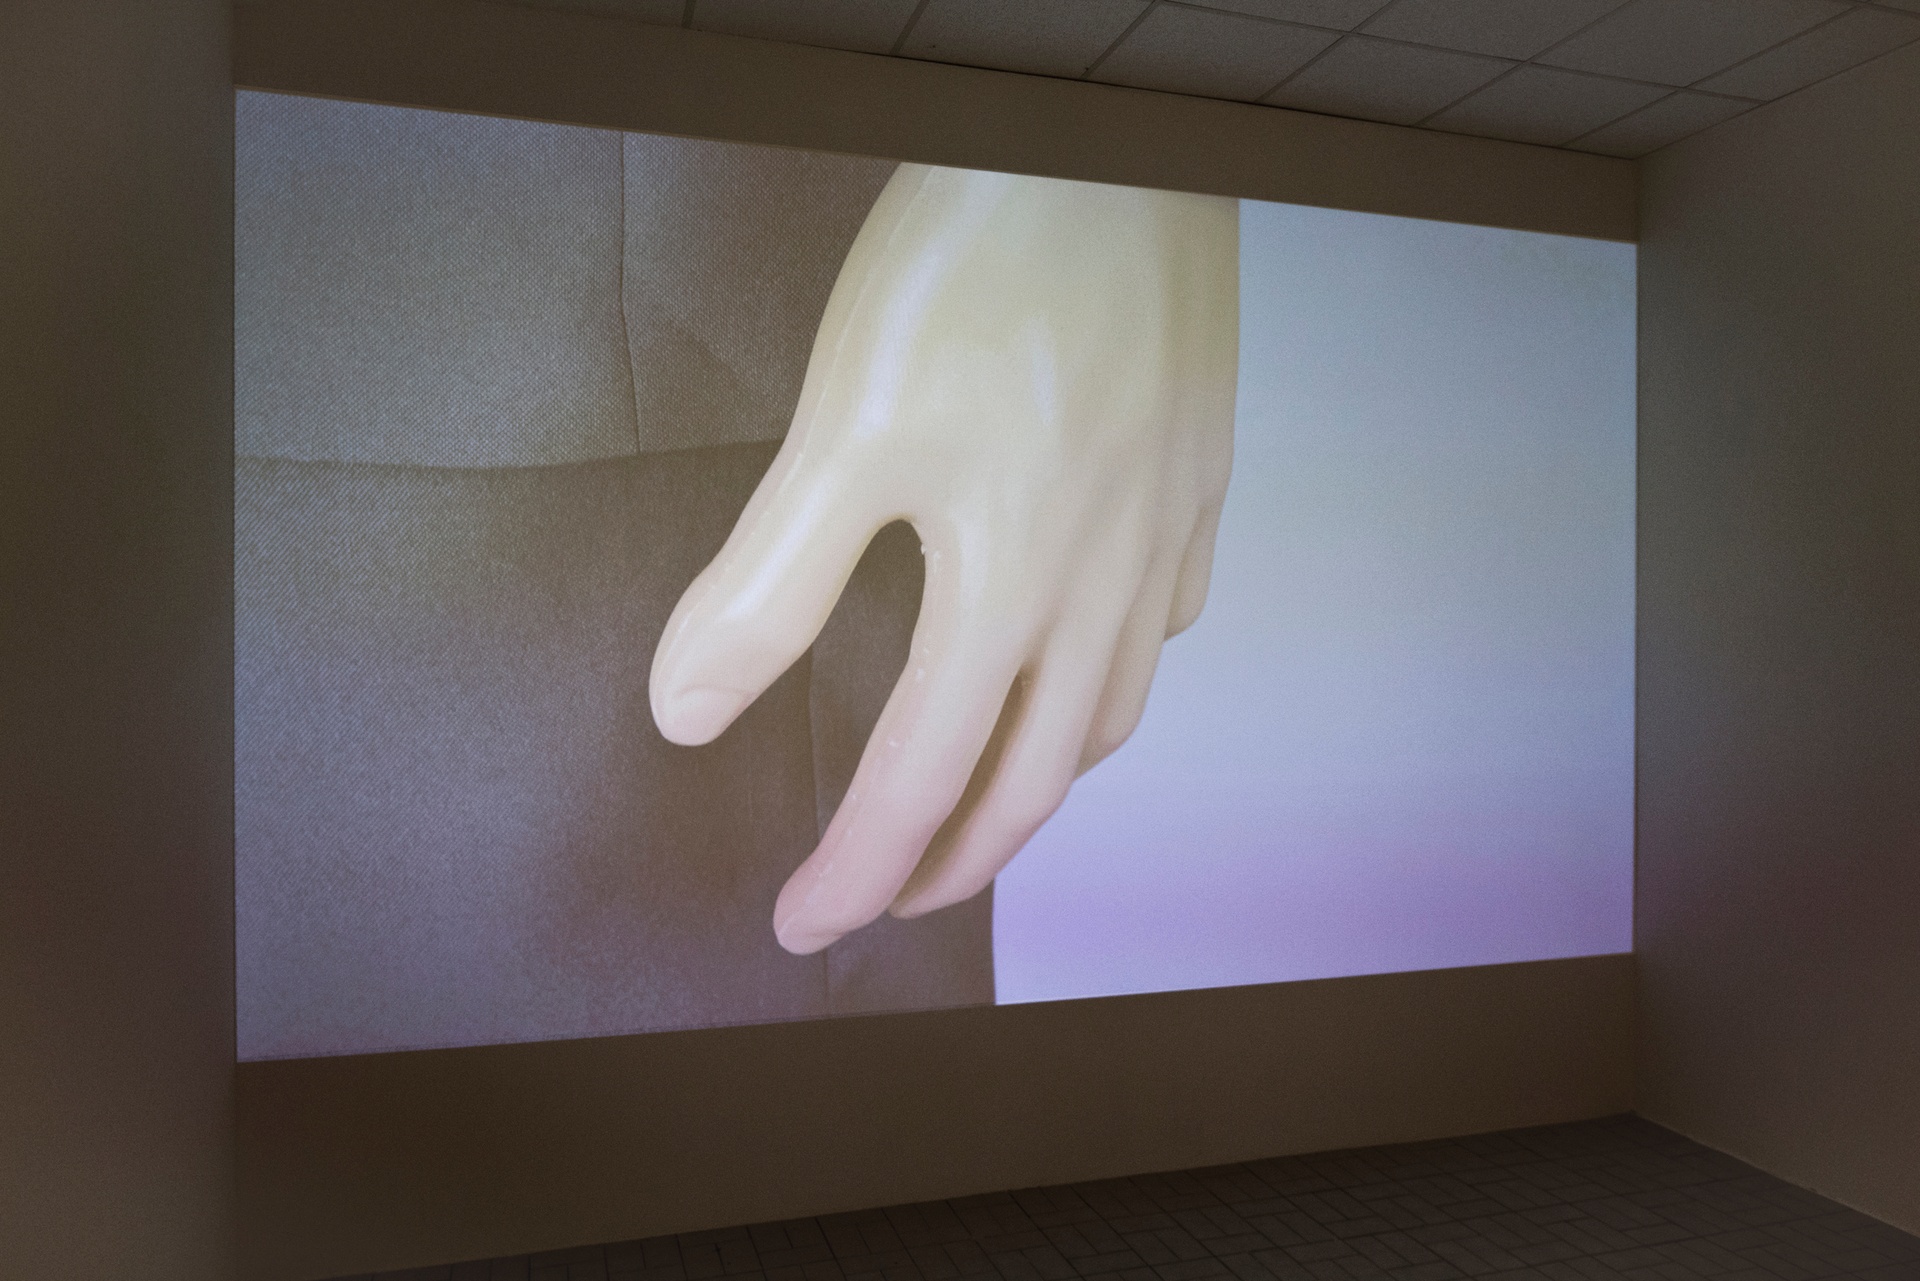 What is a Subject, 2018 (installation view). Digital Videoinstallation 16:9, 5:21 min